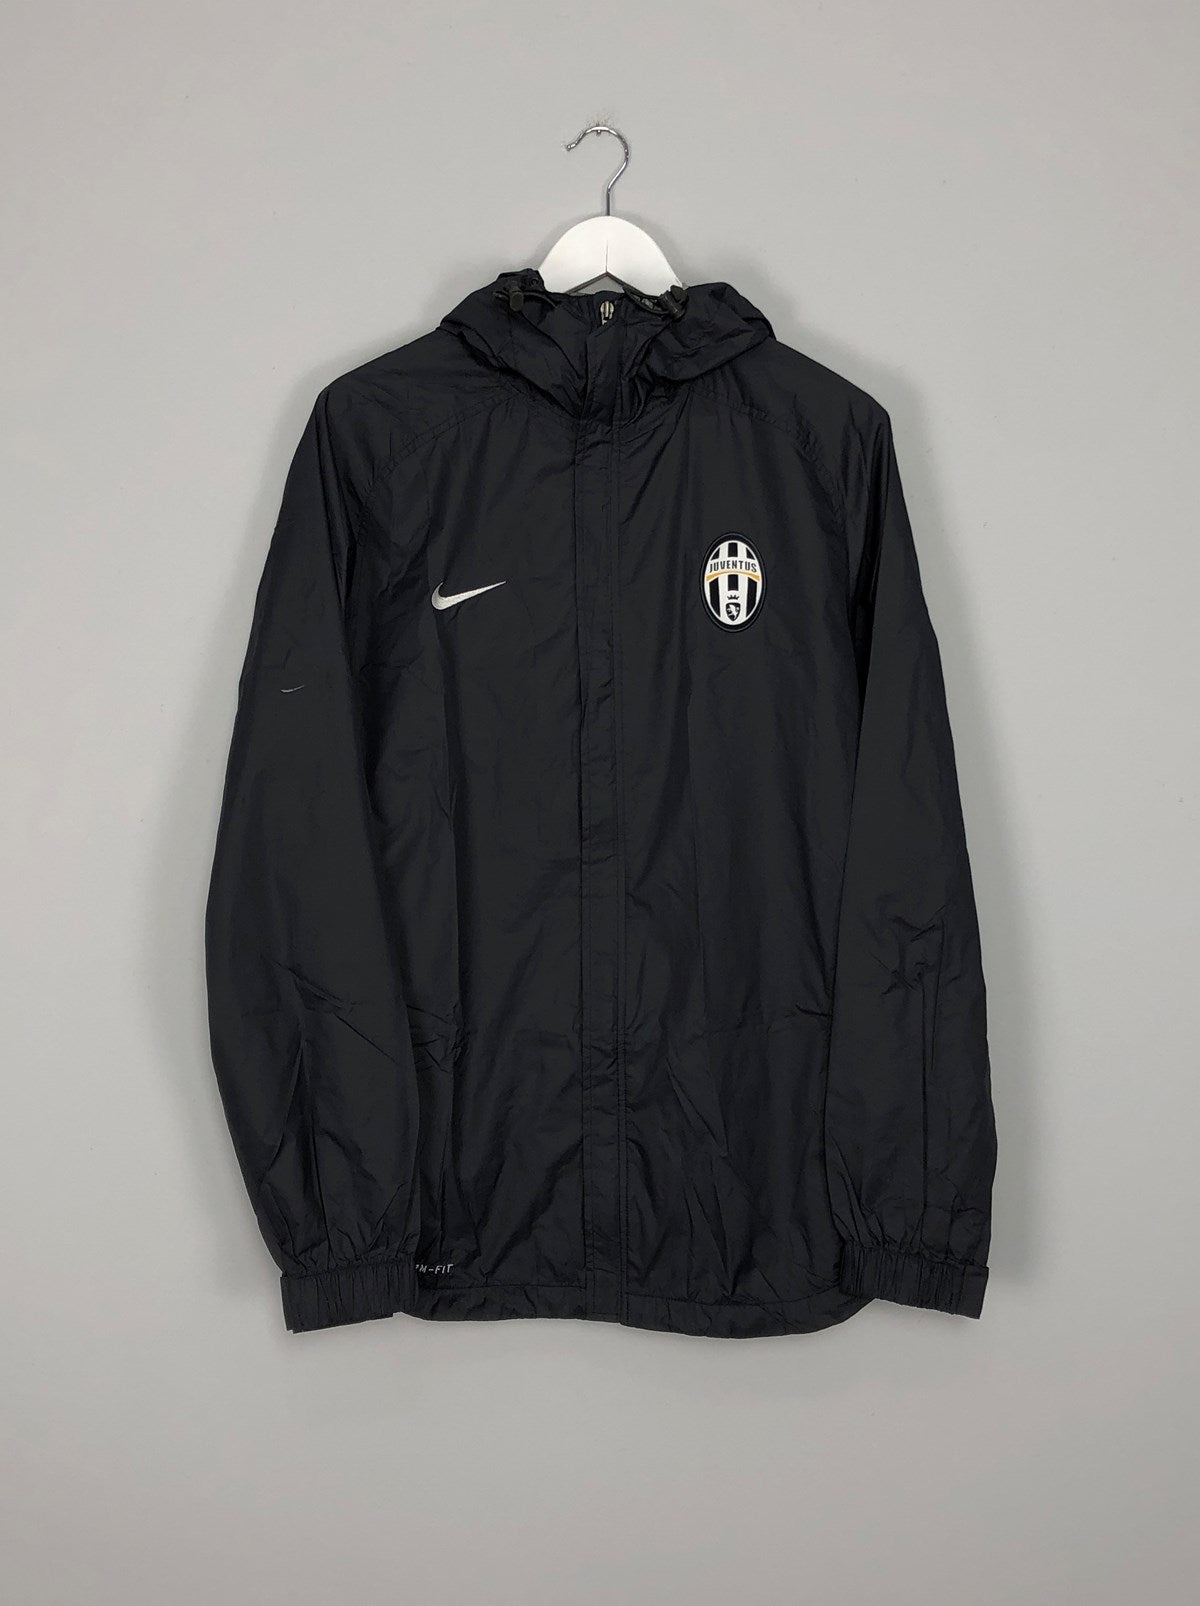 Influyente rizo Complejo Cult Kits - 2000 JUVENTUS S NIKE HOODED TRAINING JACKET (L)